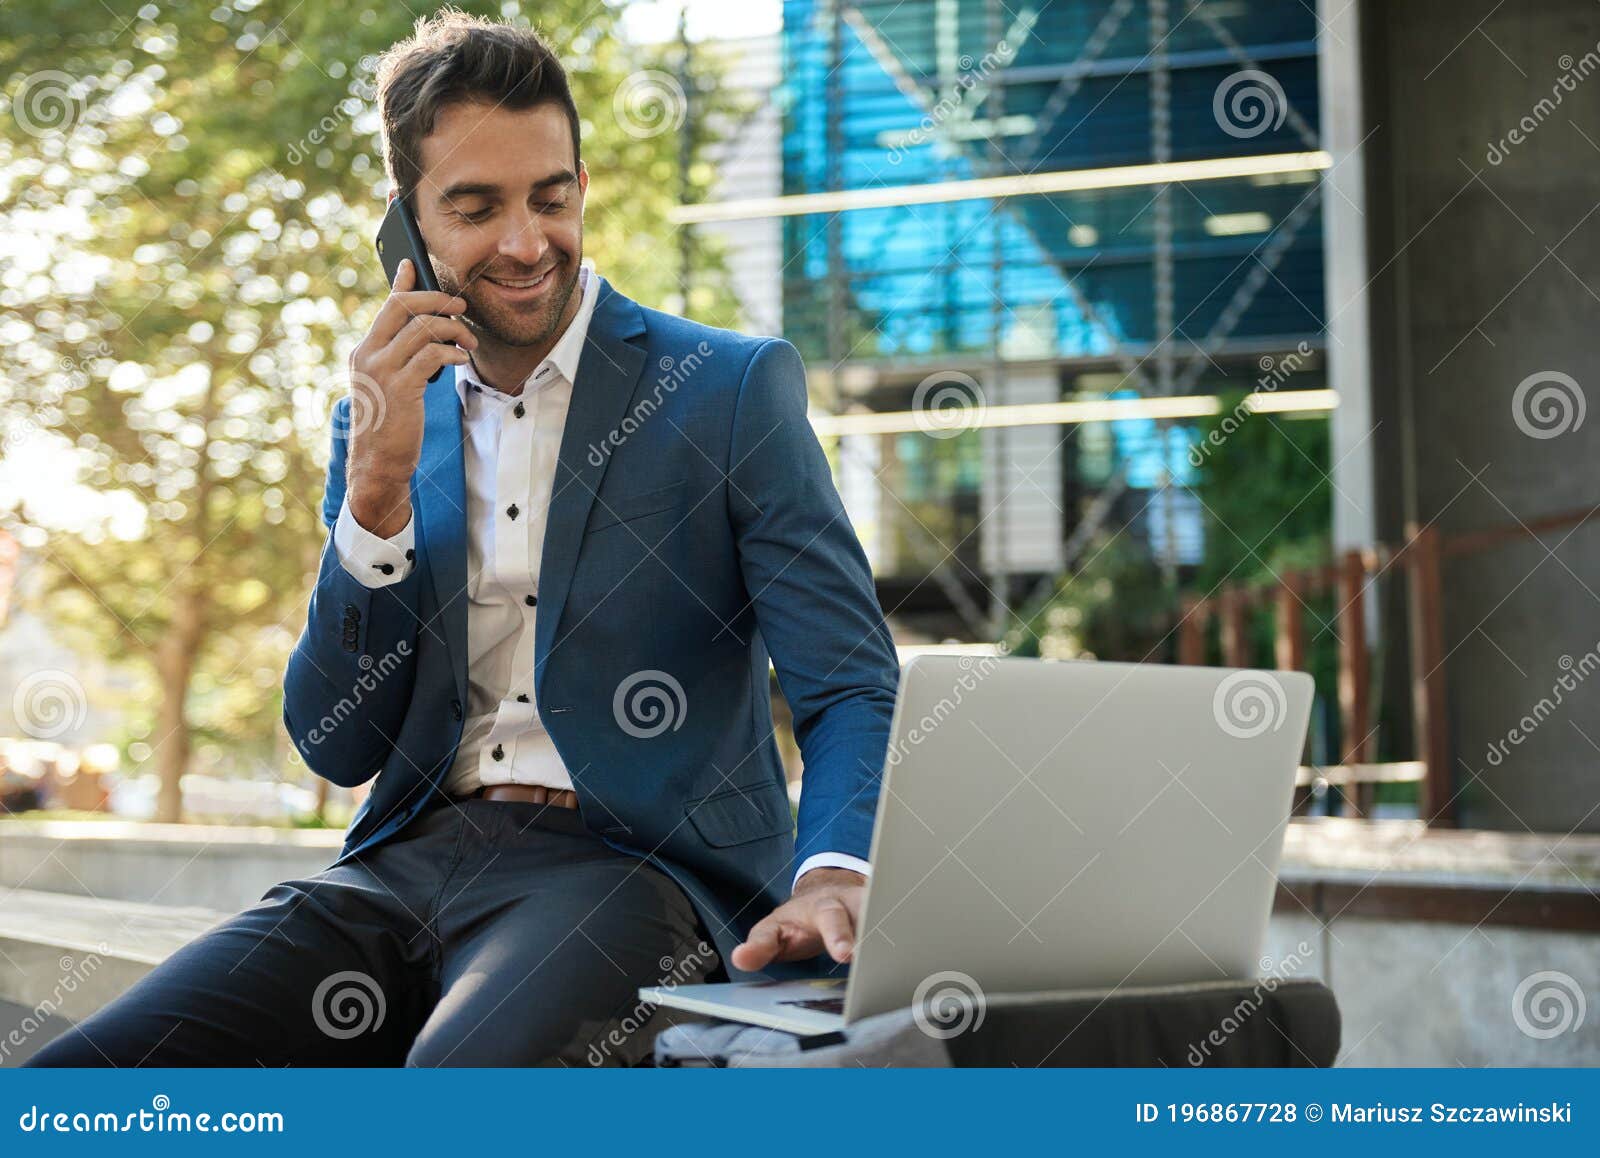 businessman using a laptop outside and talking on his cellphone